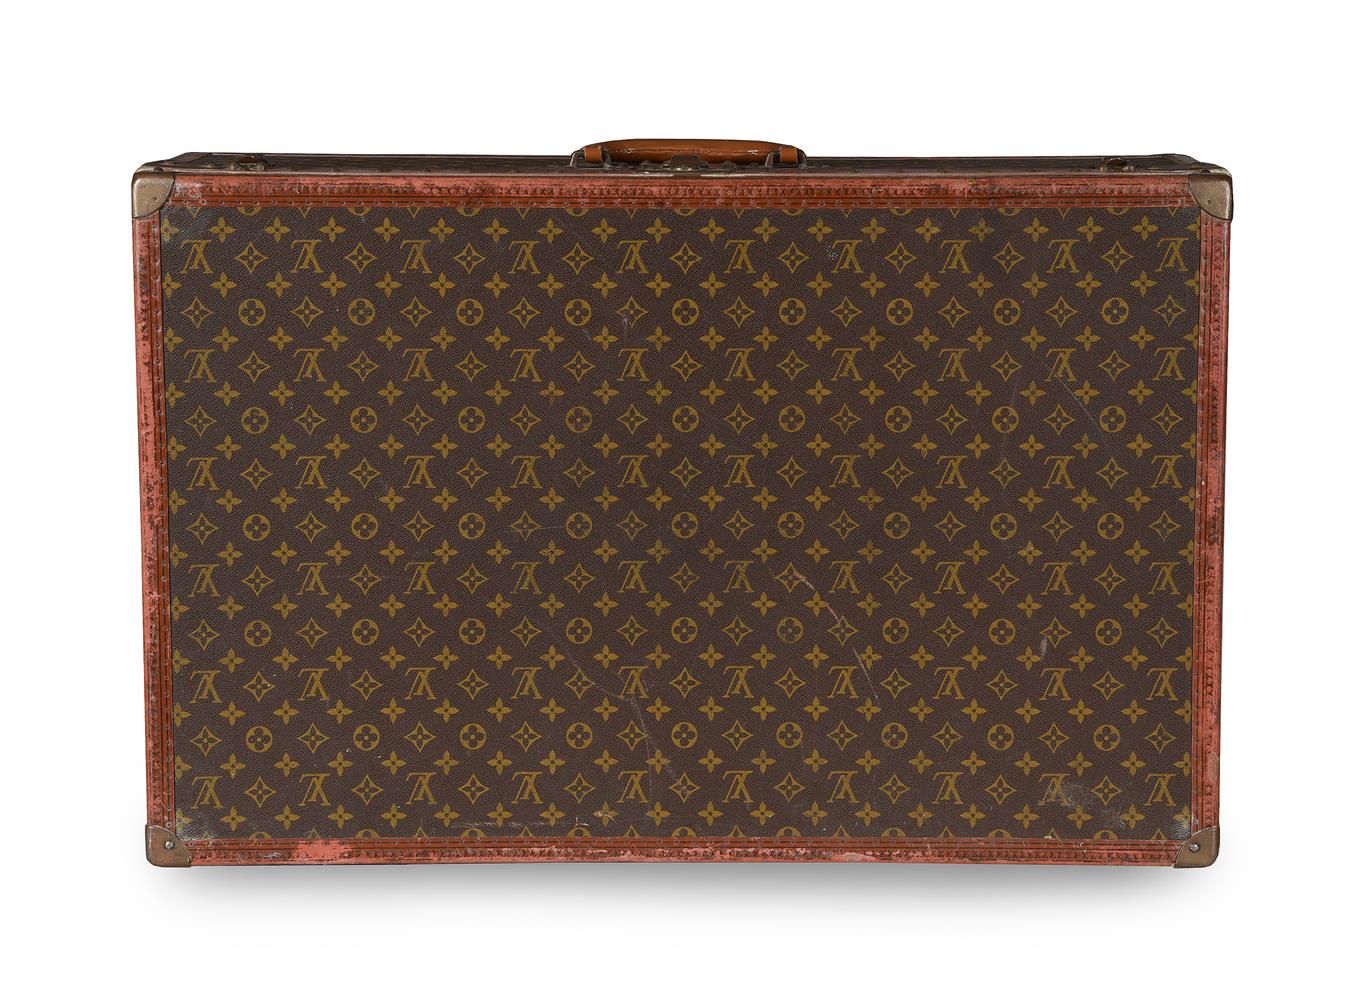 LOUIS VUITTON, A MONOGRAMMED COATED CANVAS HARD TRAVELLING CASE - Image 2 of 5